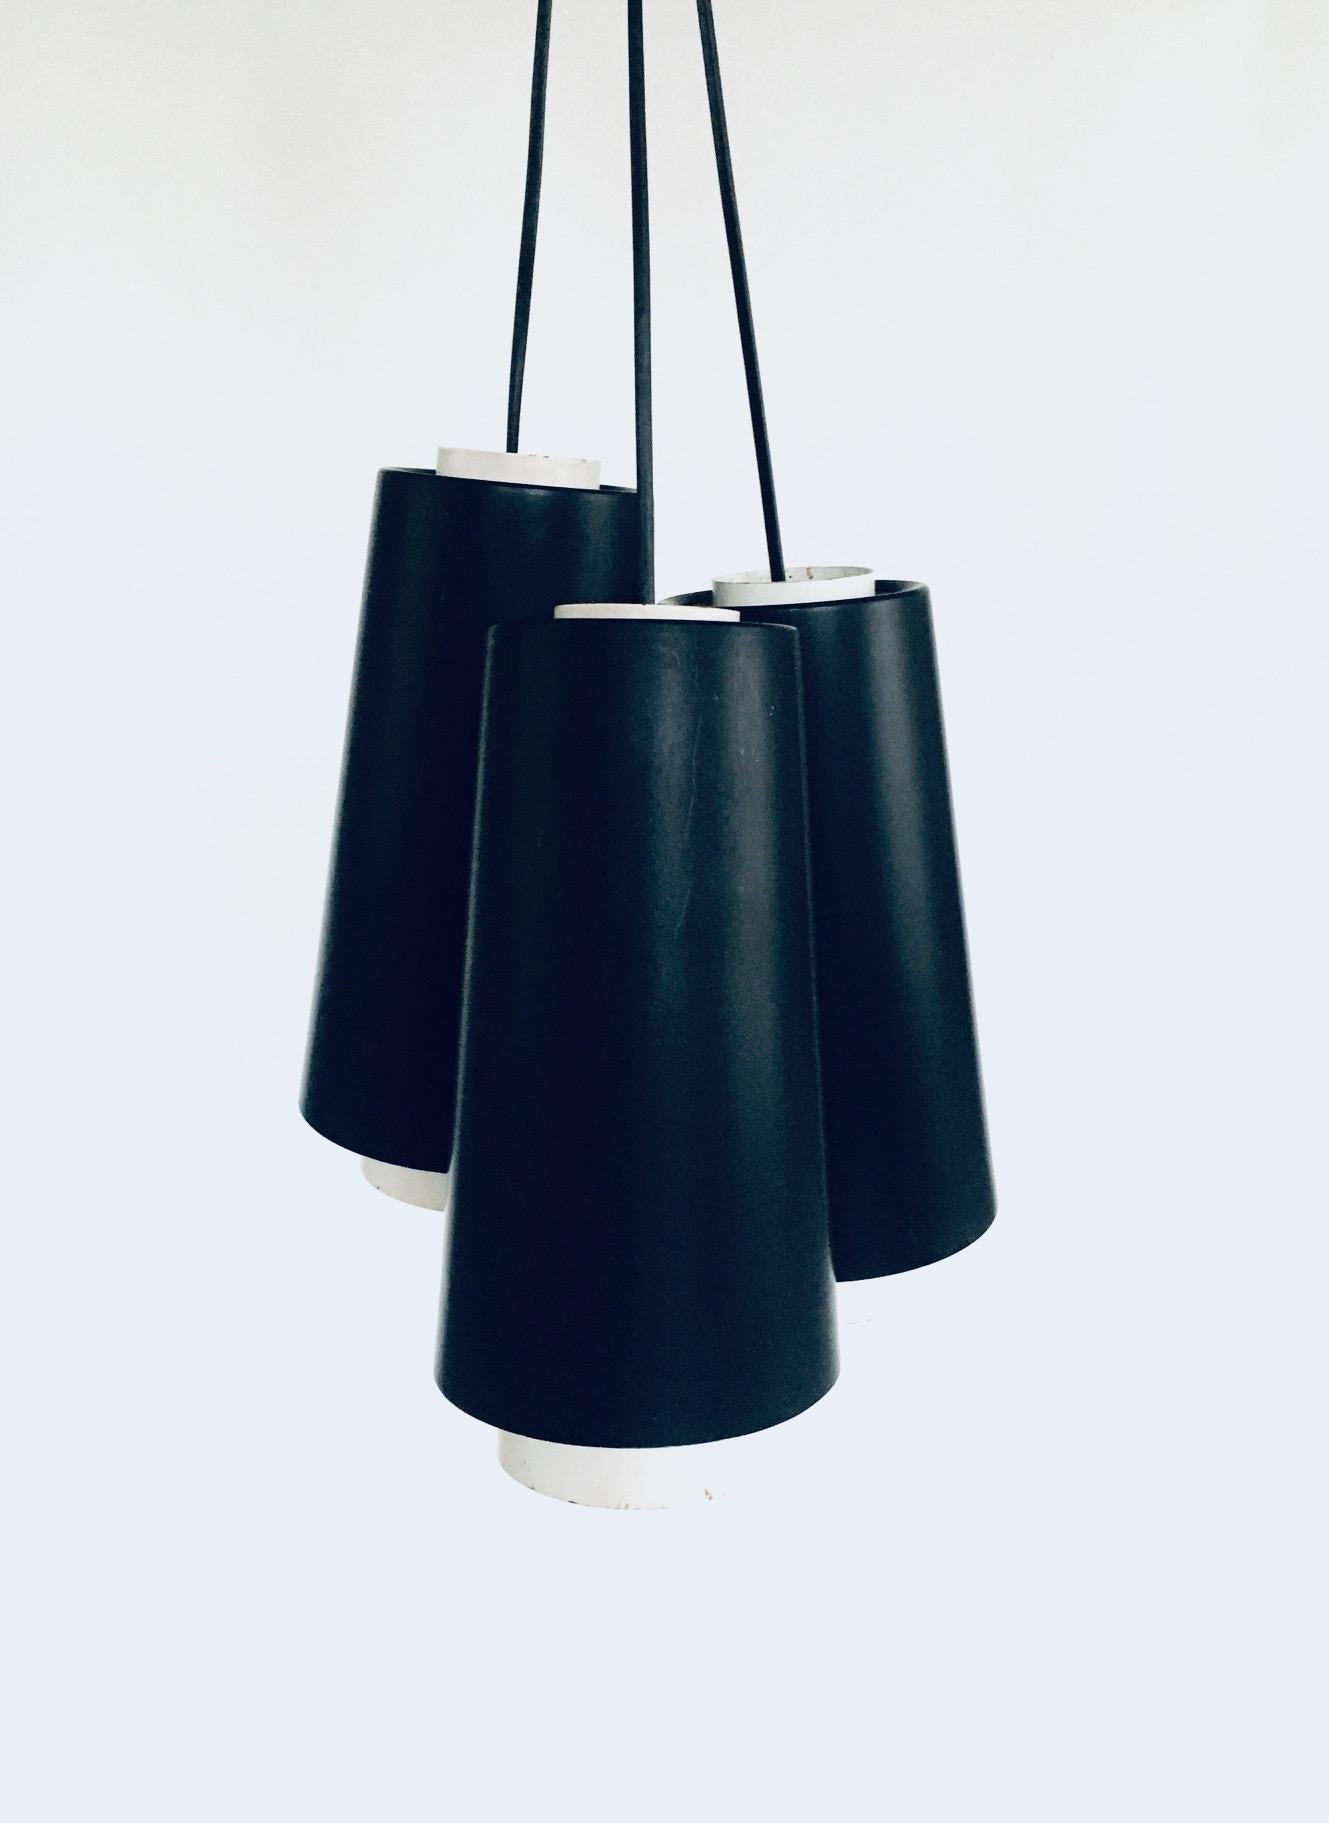 Vintage Mid-Century Modern Dutch Design 3 Pendant Lamps by RAAK Amsterdam, Holland 1960's. 3 Hanging lamps in black and white metal. Set up as one pendant lamp. All 3 lamps are in good condition with minor corrosion on the white metal parts. Black